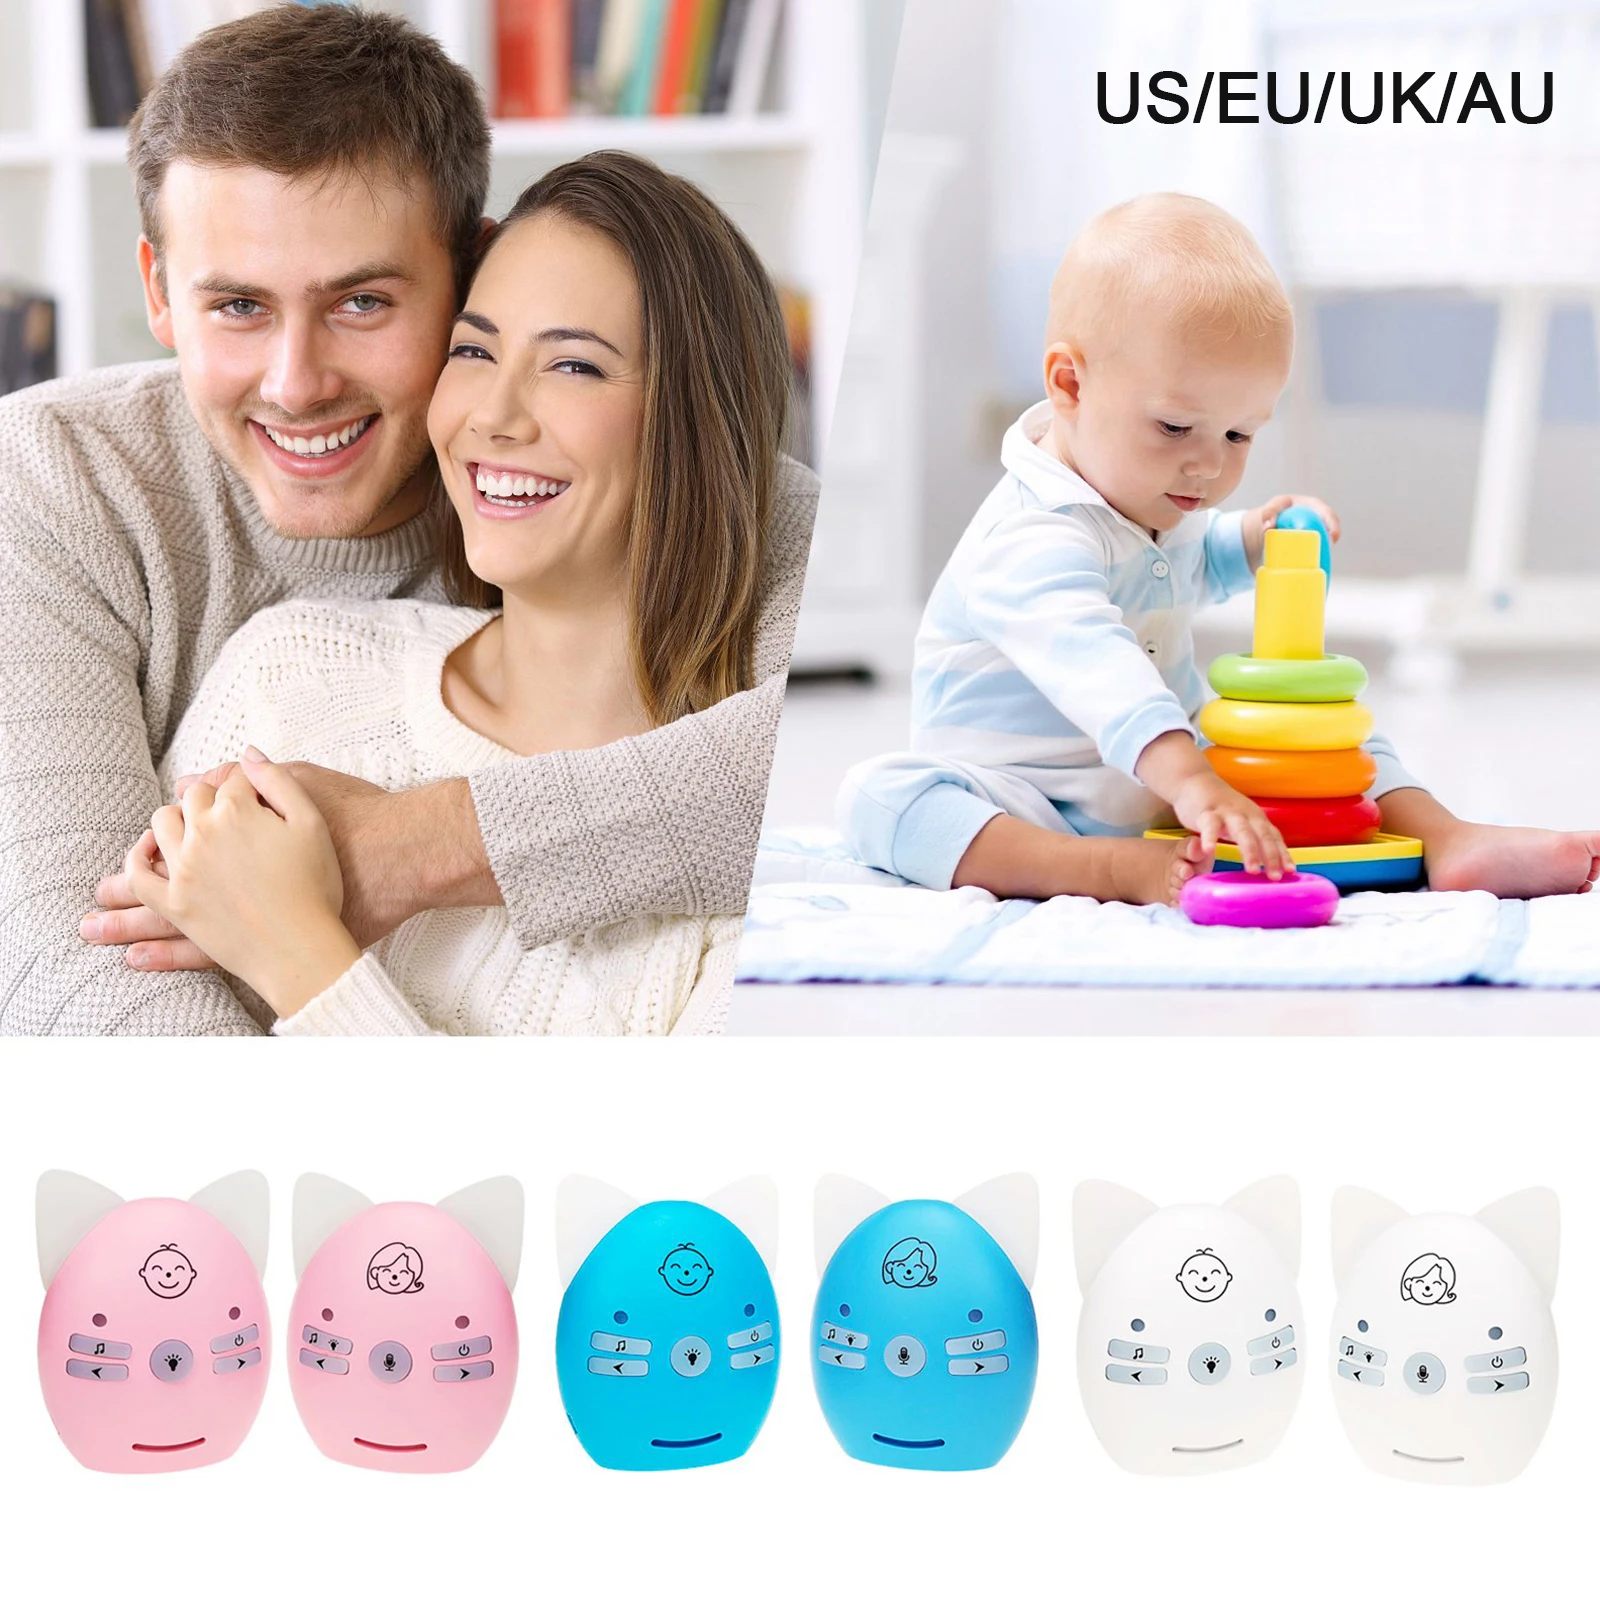 Digital Audio Baby Monitor Long Range up to 1000 ft Warning Lullabies, Two Way Talk, Rechargeable Battery Night Light US Plug